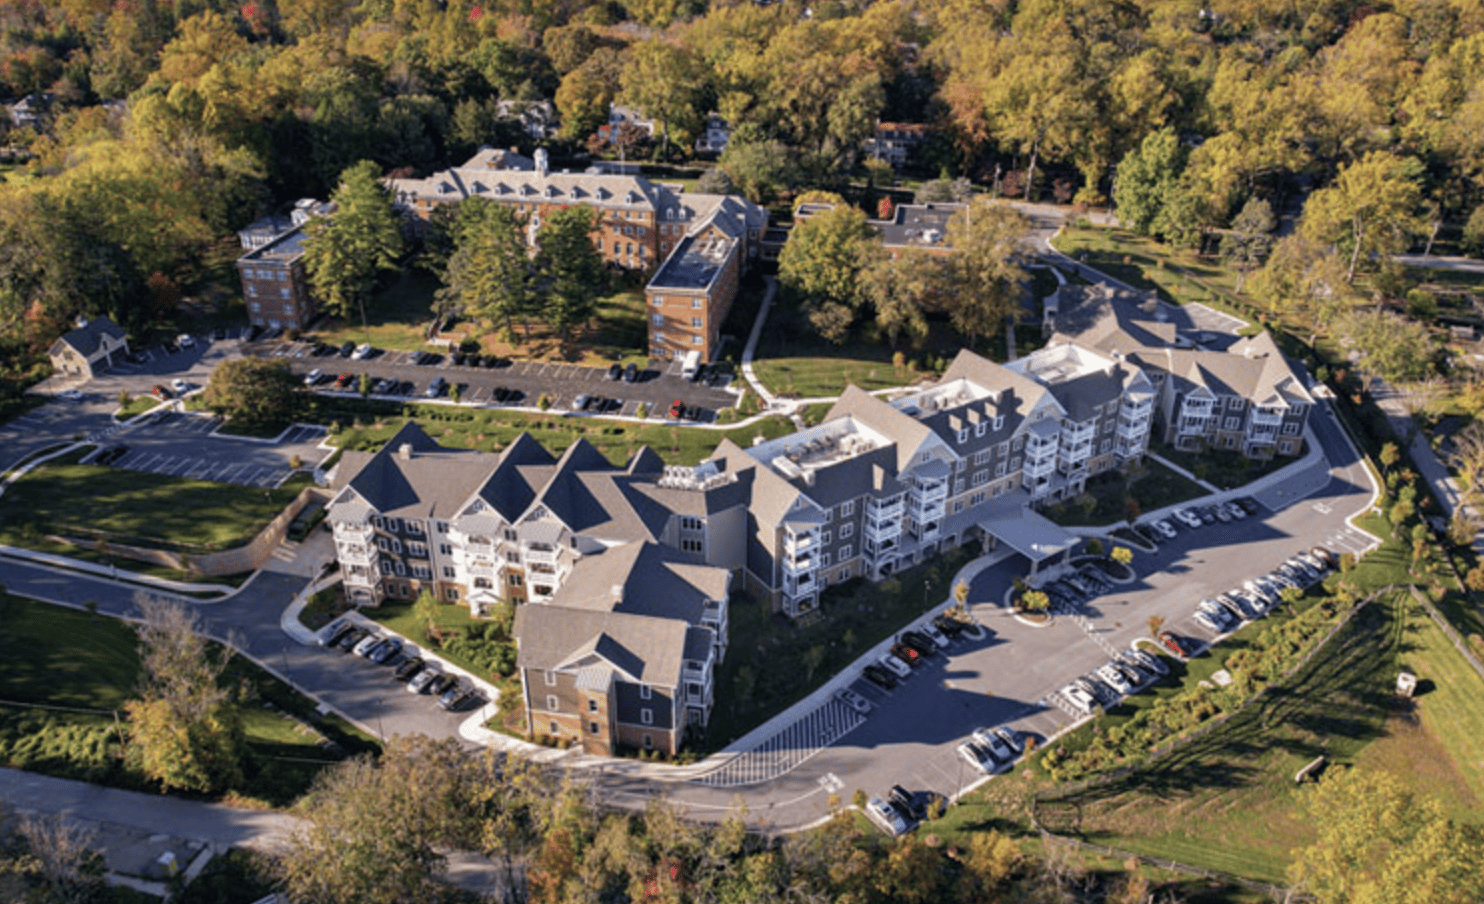 A bird’s-eye view of the property at Springwell Senior Living Community.